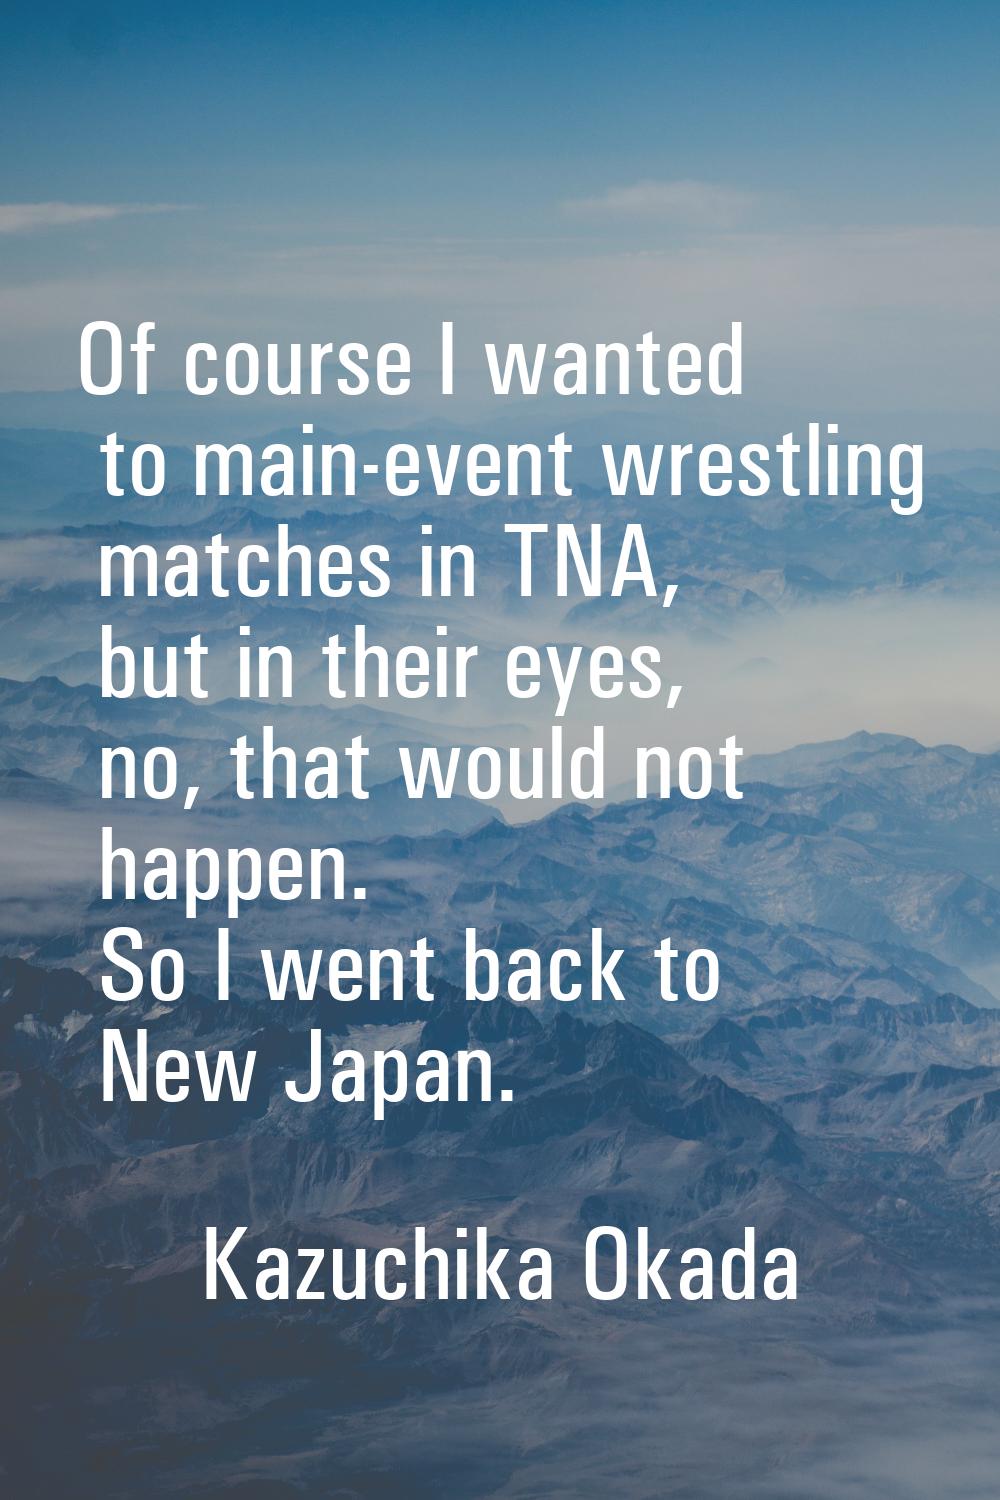 Of course I wanted to main-event wrestling matches in TNA, but in their eyes, no, that would not ha